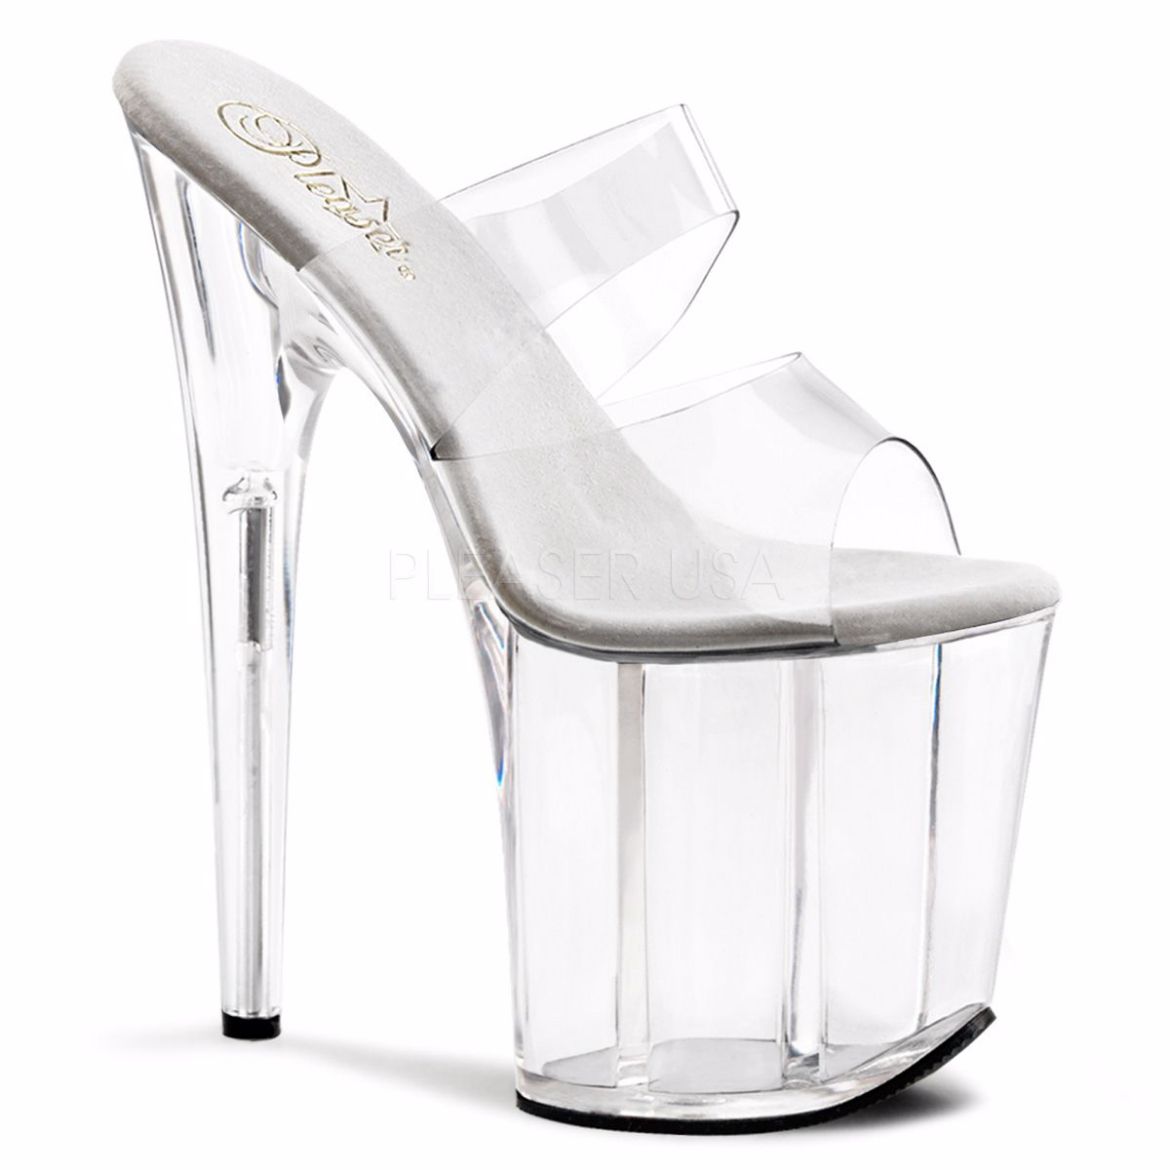 Product image of Pleaser Flamingo-802 Clear/Clear, 8 inch (20.3 cm) Heel, 4 inch (10.2 cm) Platform Slide Mule Shoes